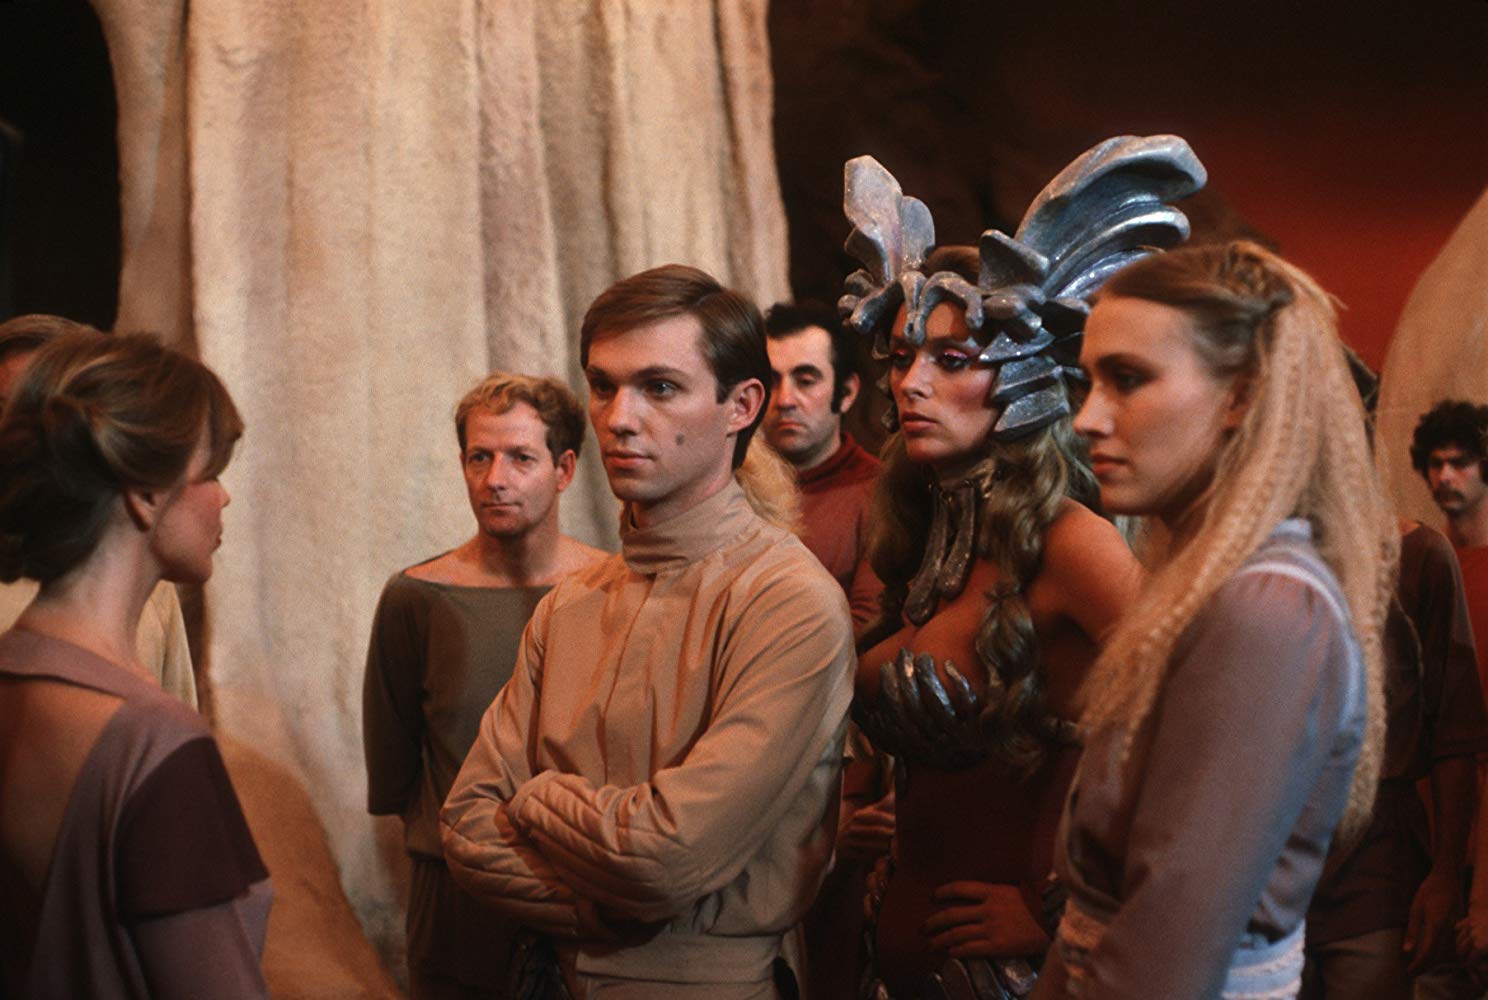 (l to r in centre) Shad (Richard Thomas), St Exmin the Valkyrie (Sybil Danning) and Naniela (Darlanne Fluegel) in Battle Beyond the Stars (1980)